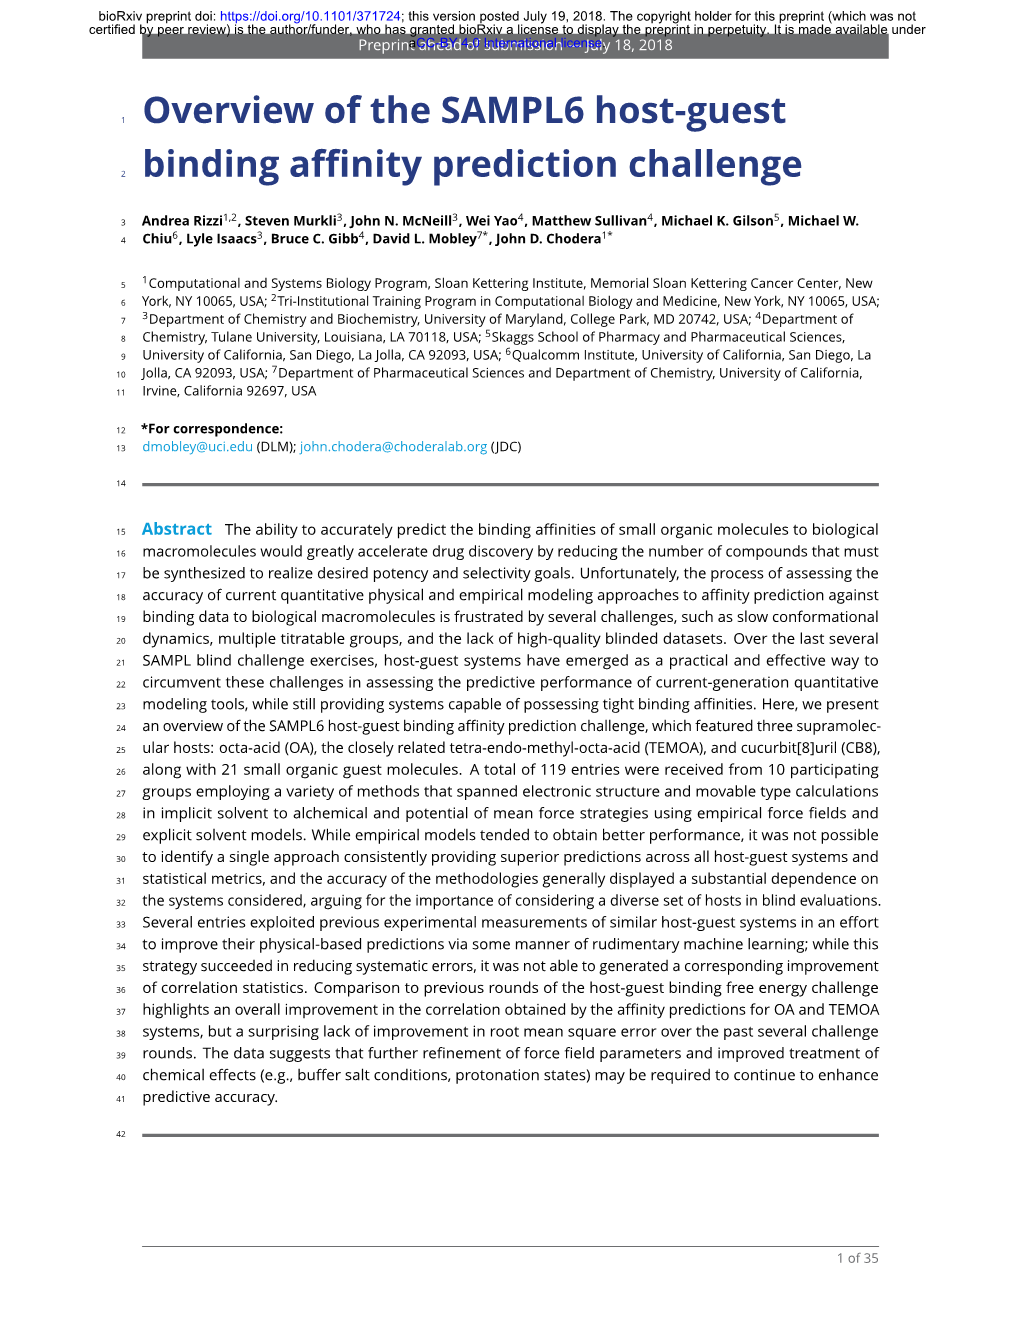 Overview of the SAMPL6 Host-Guest Binding Affinity Prediction Challenge